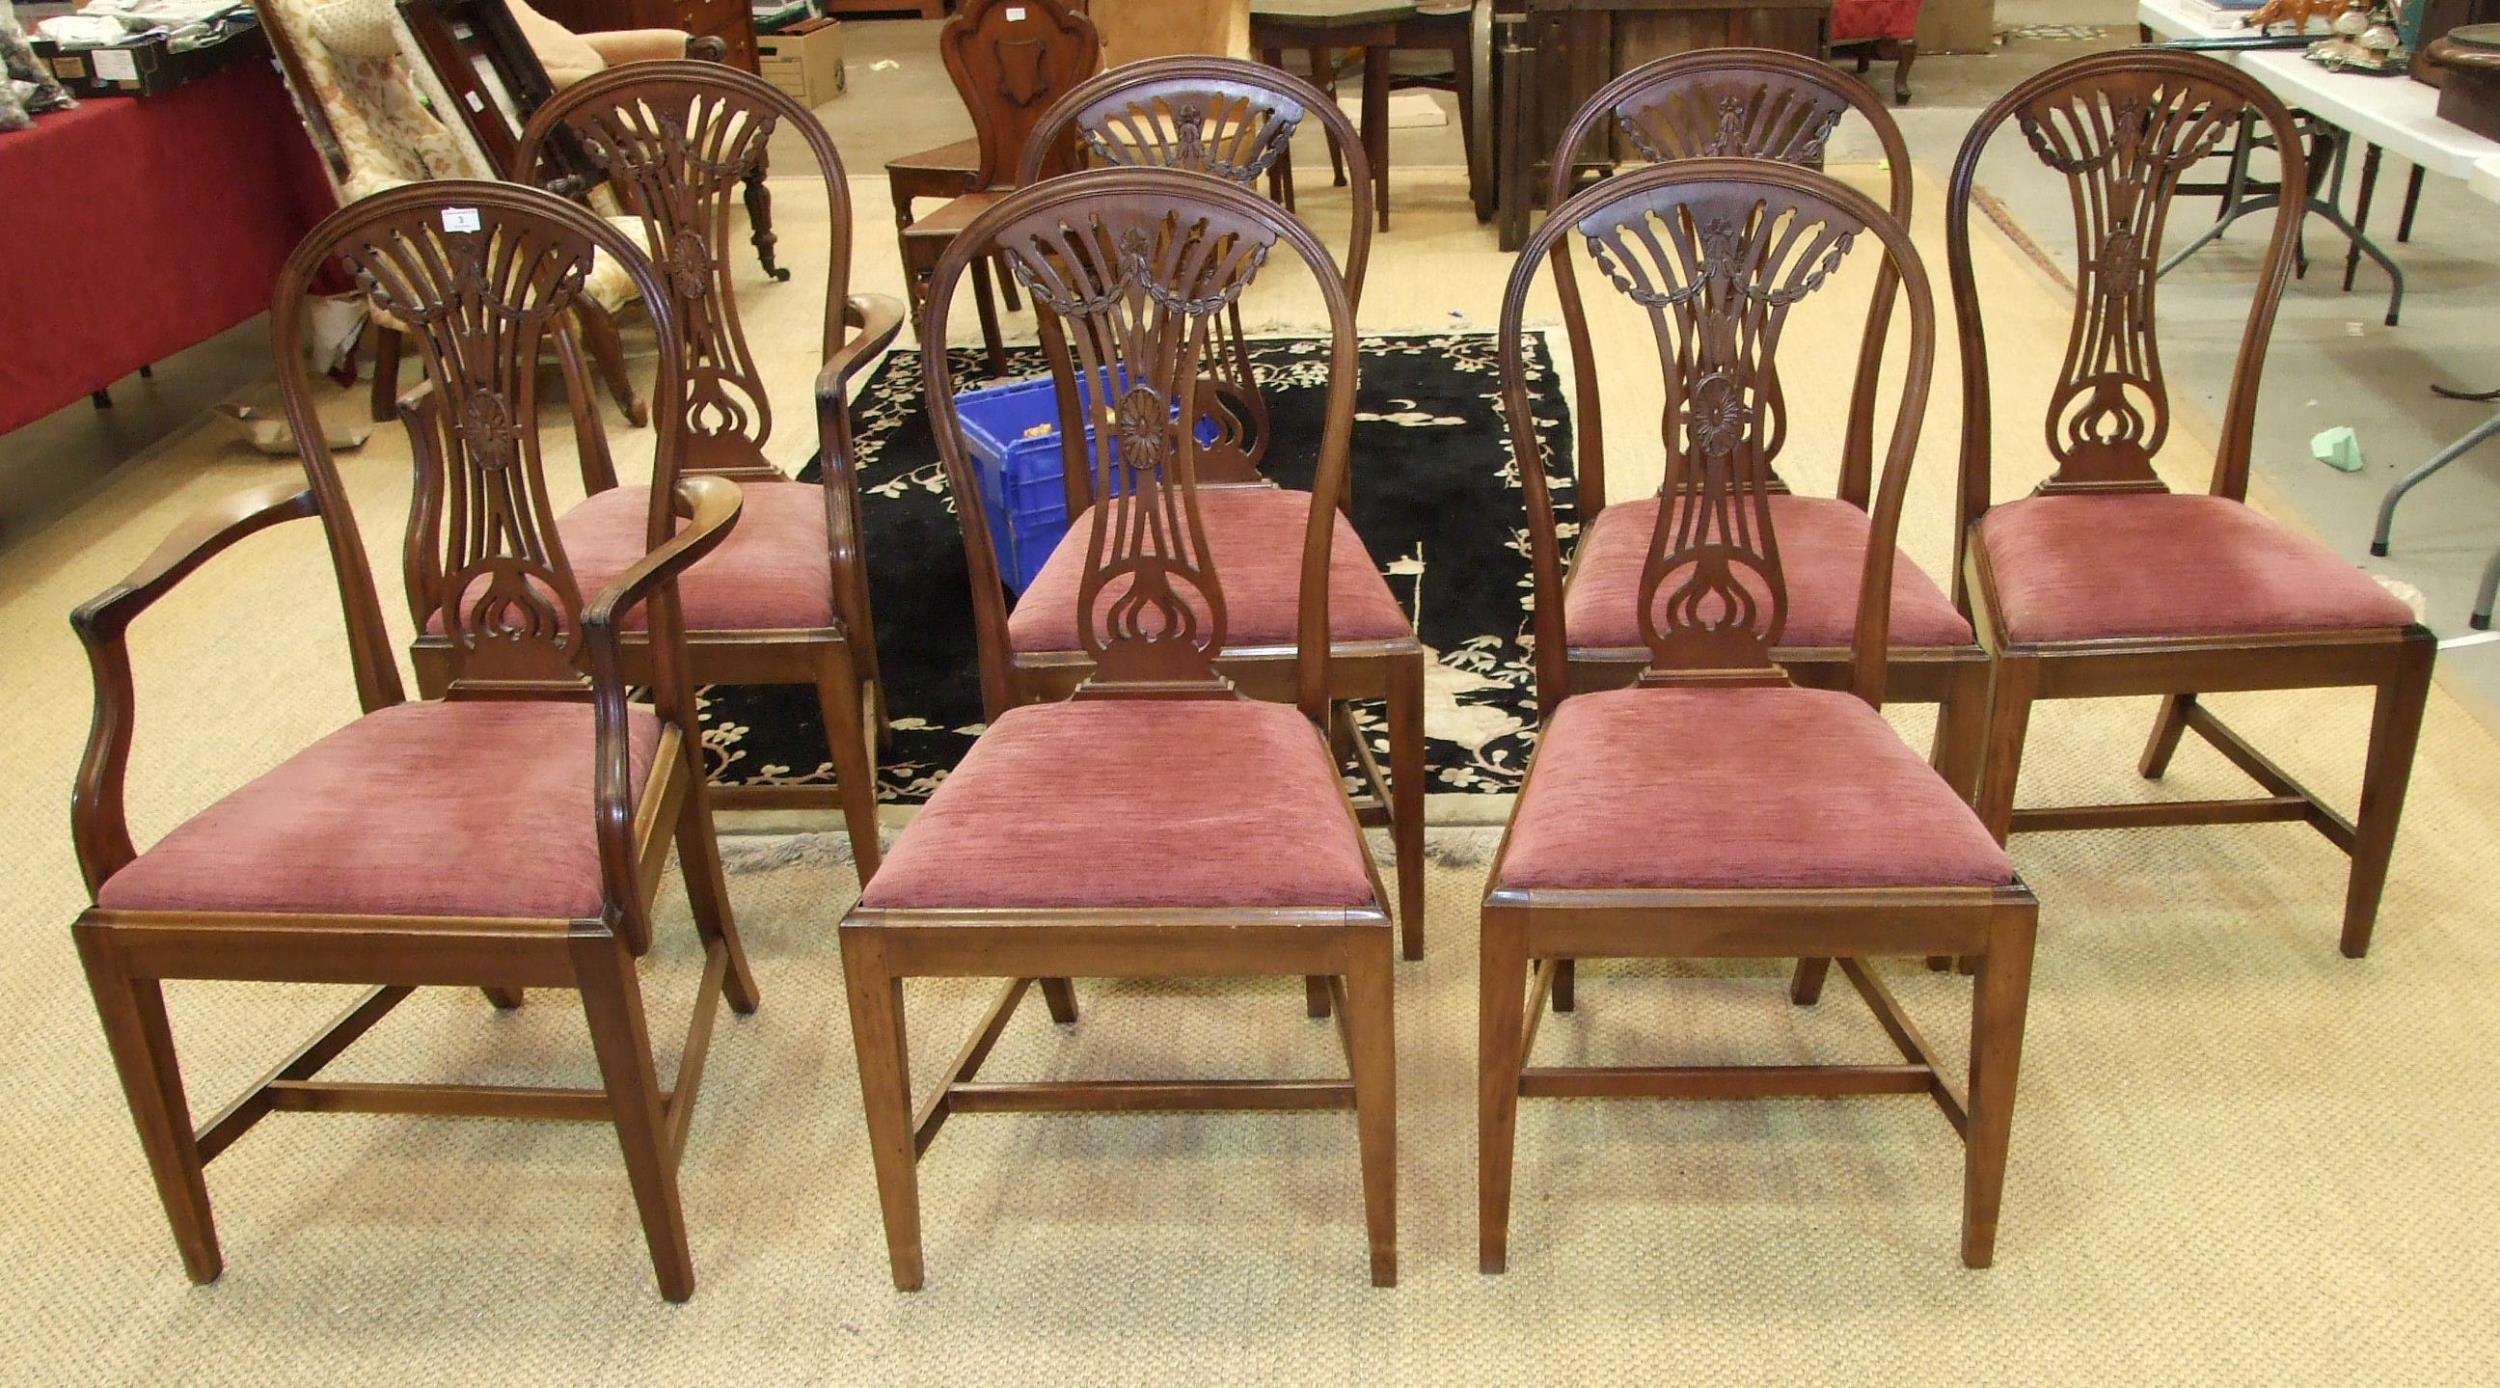 Seven reproduction Hepplewhite-style dining chairs, together with a Regency-style twin-pillar dining